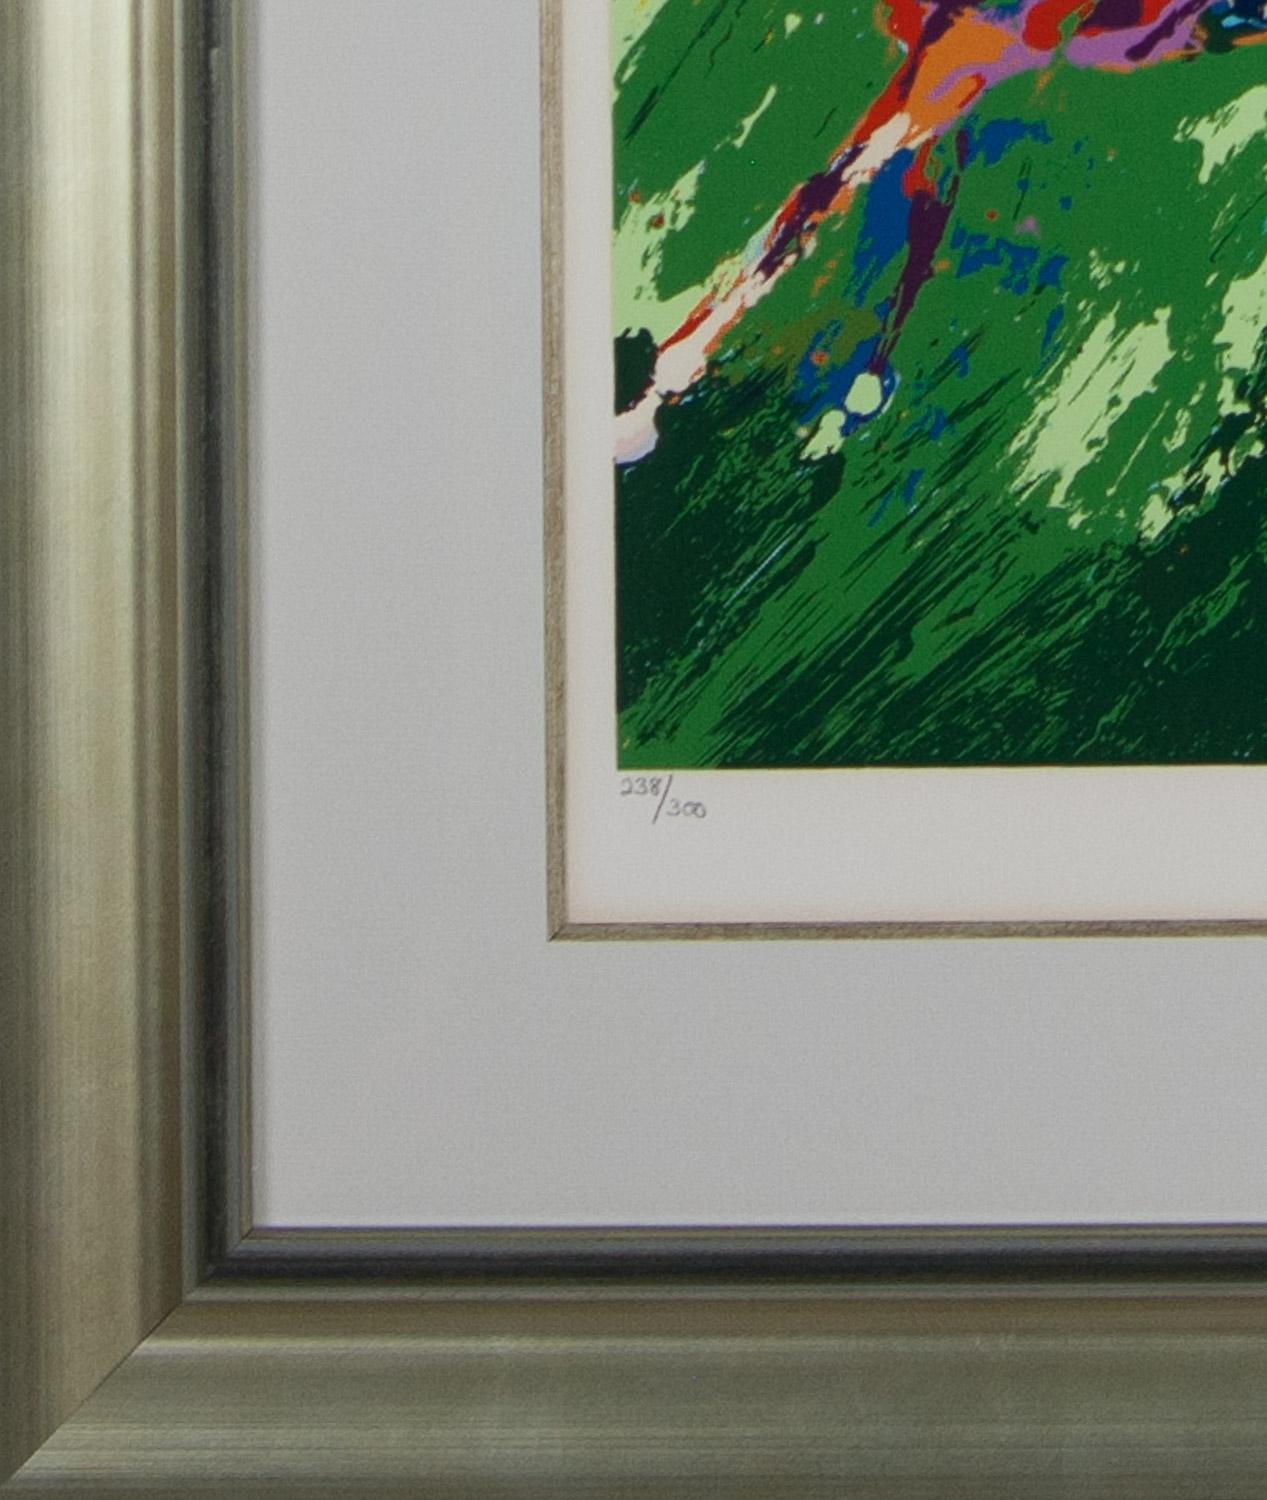    The Equestrian by Leroy Neiman is a framed limited edition  no. 238/300 serigraph signed in pencil by the artist and published on Arches paper by Knoelder Publishing , Inc, 1981. This original serigraph is framed in a burnished silver frame with